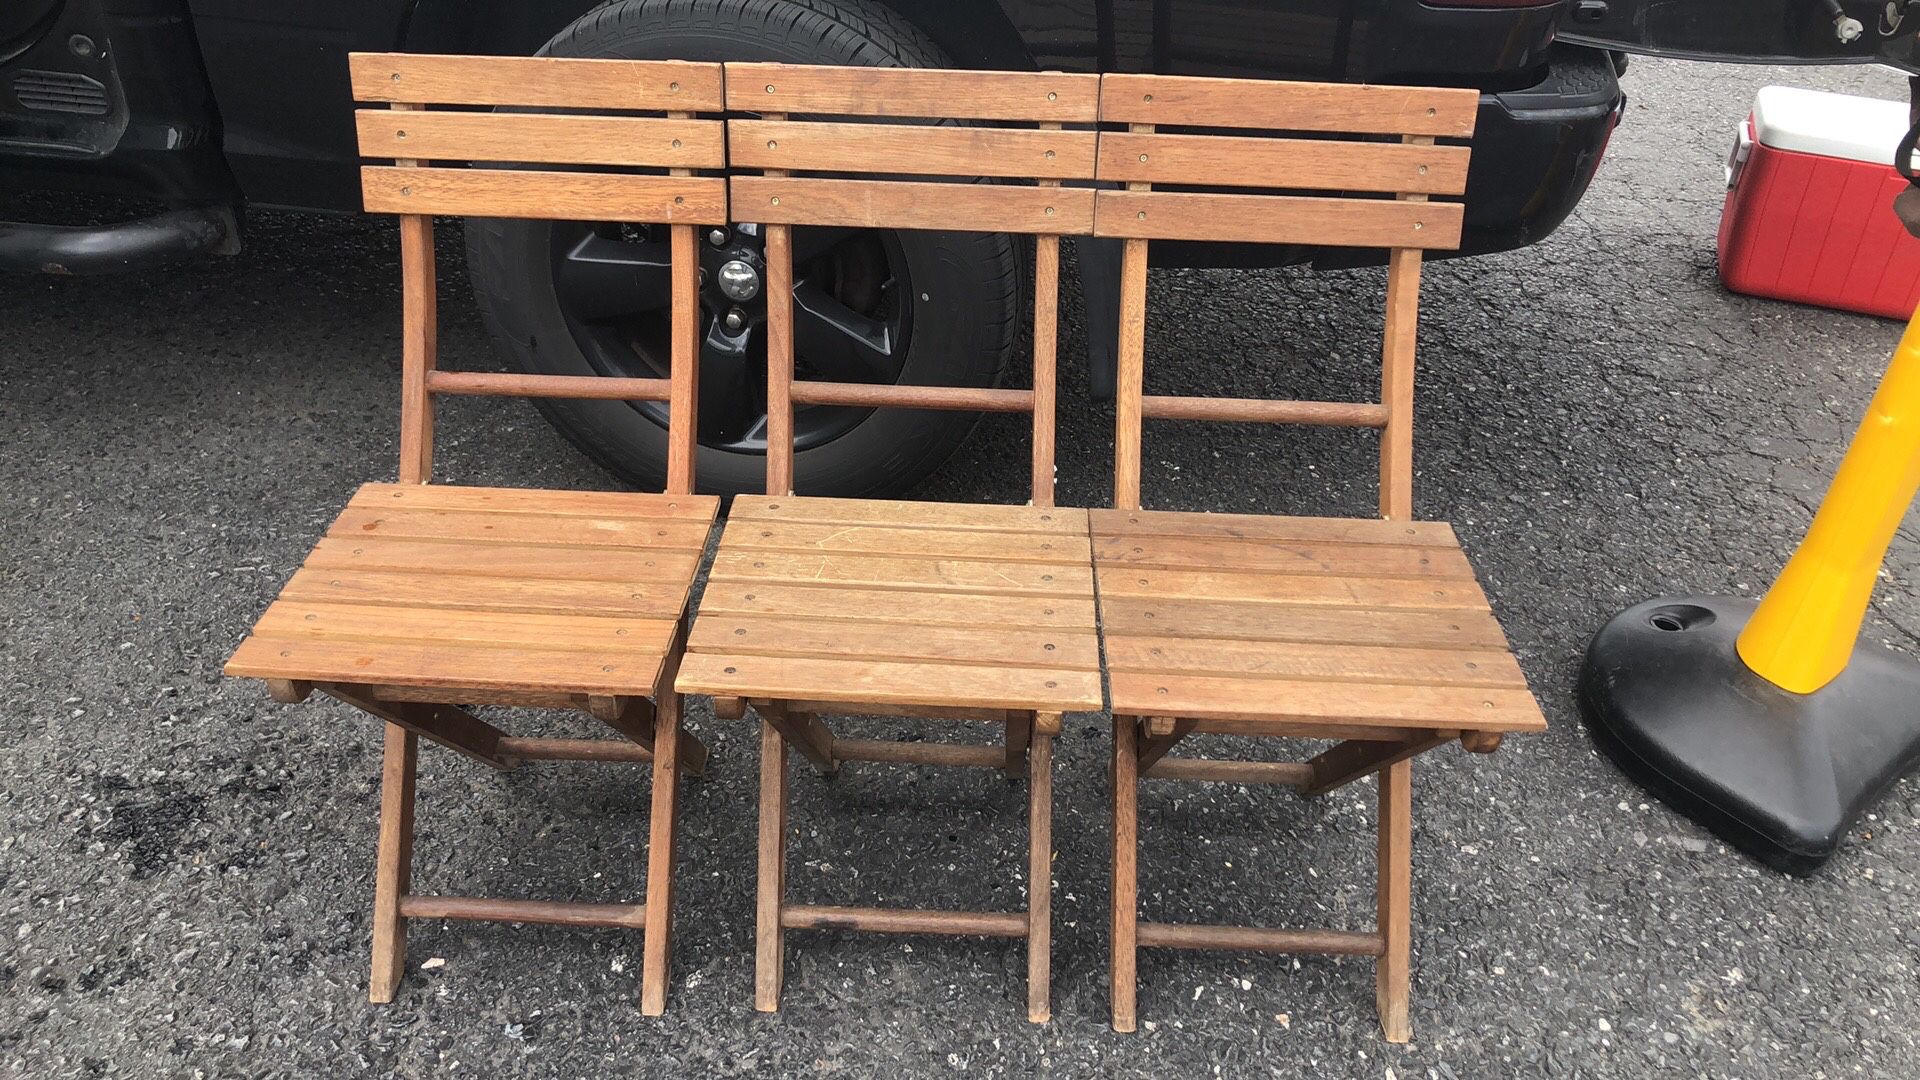 3 Wooden Folding chairs